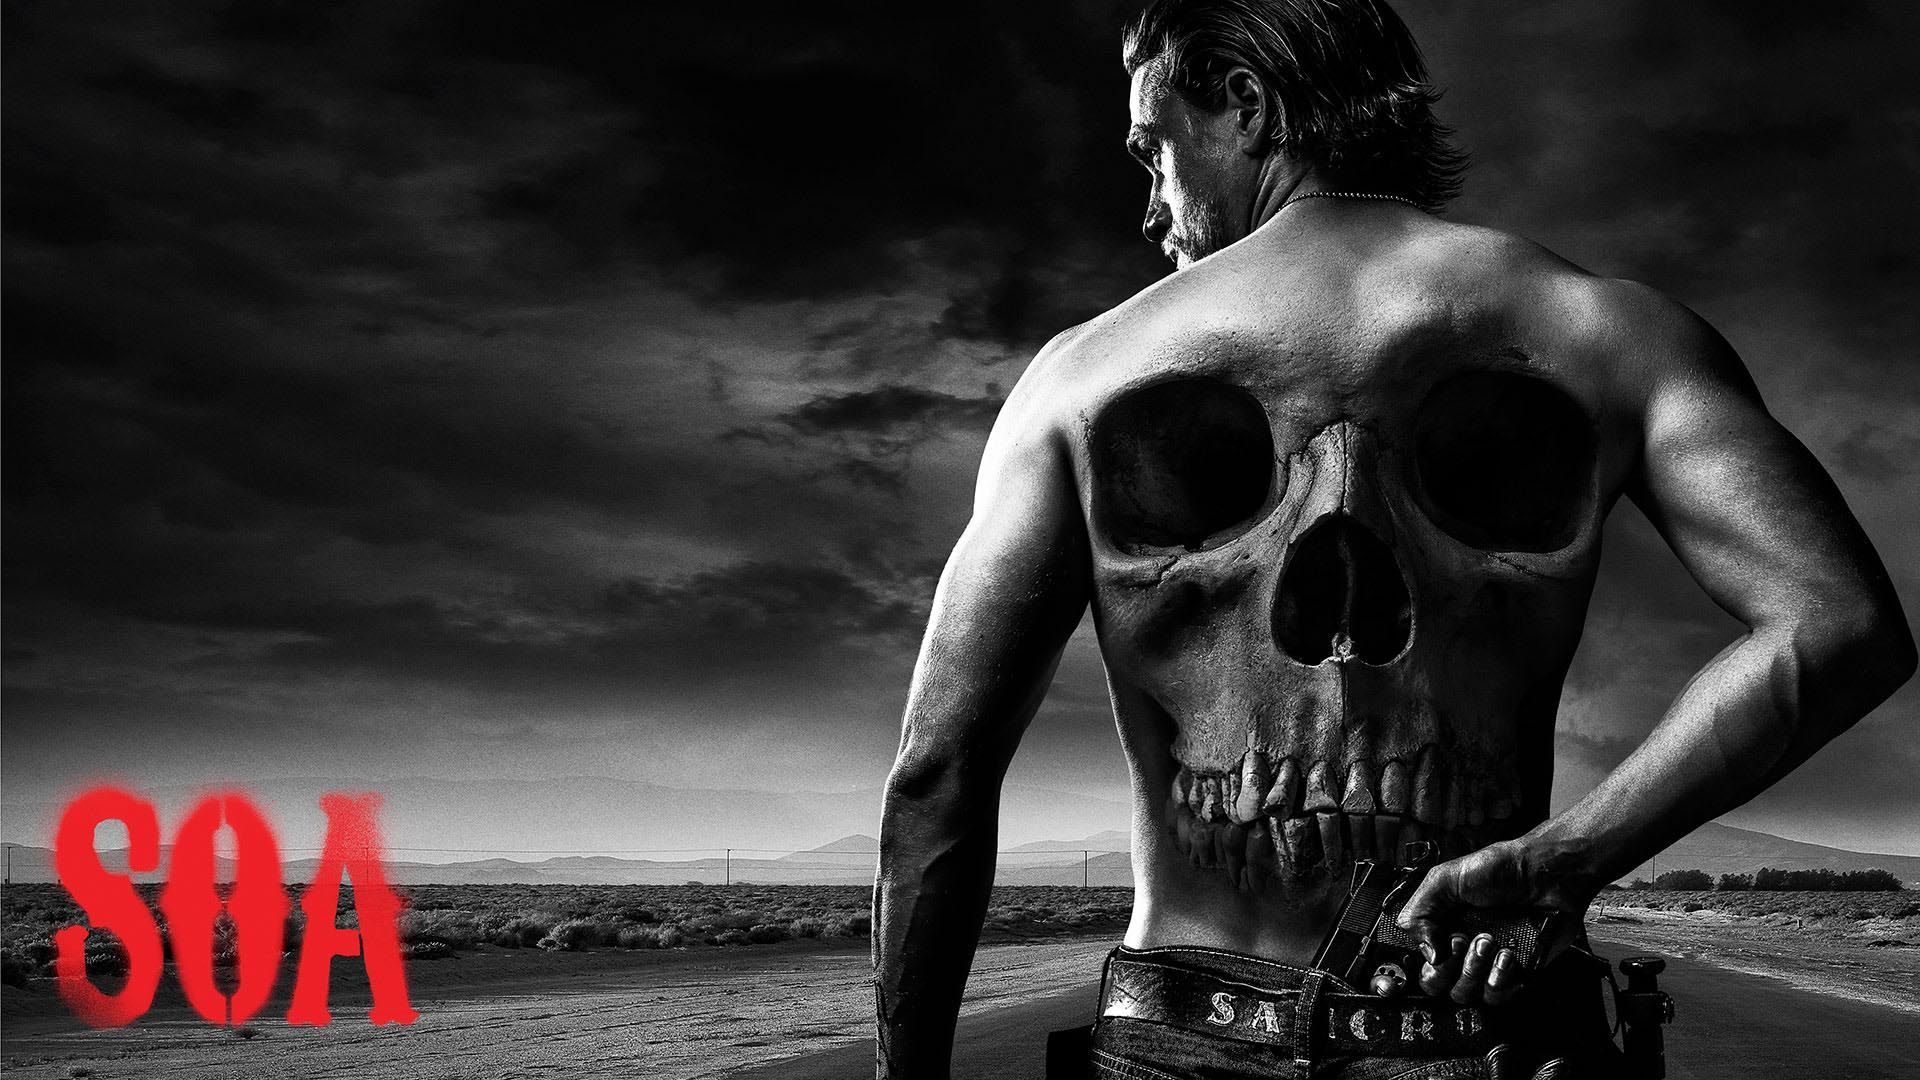 Sons Of Anarchy - Sons Of Anarchy Wallpaper 37627568 - Fanpop